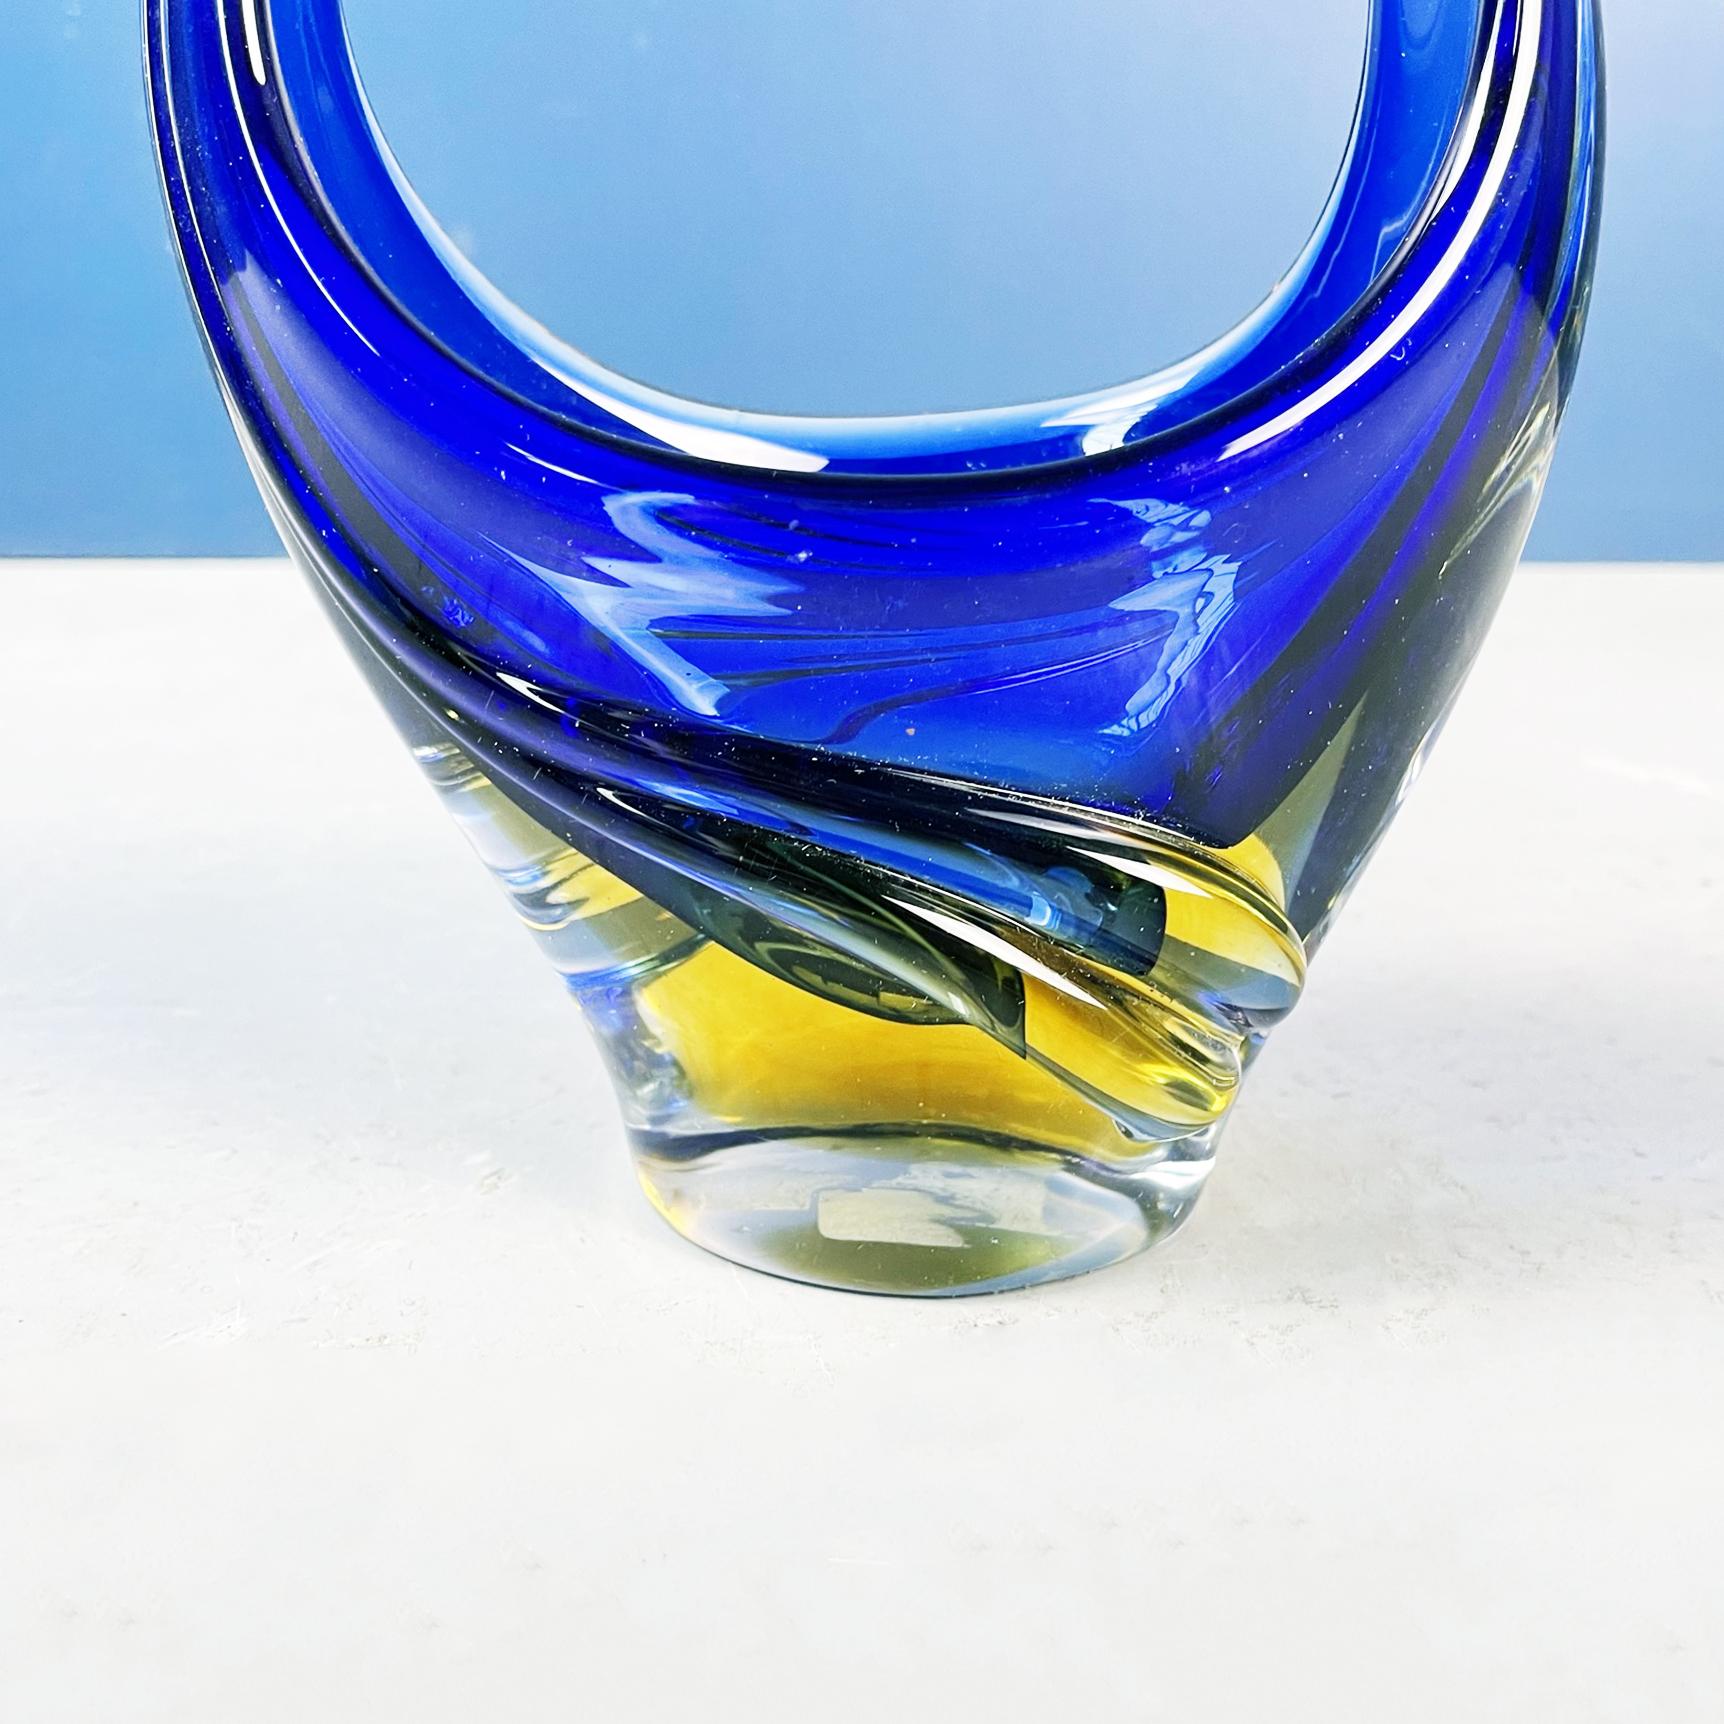 Italian Modern Sculpture in Blue and Yellow Murano Glass, 1970s For Sale 2